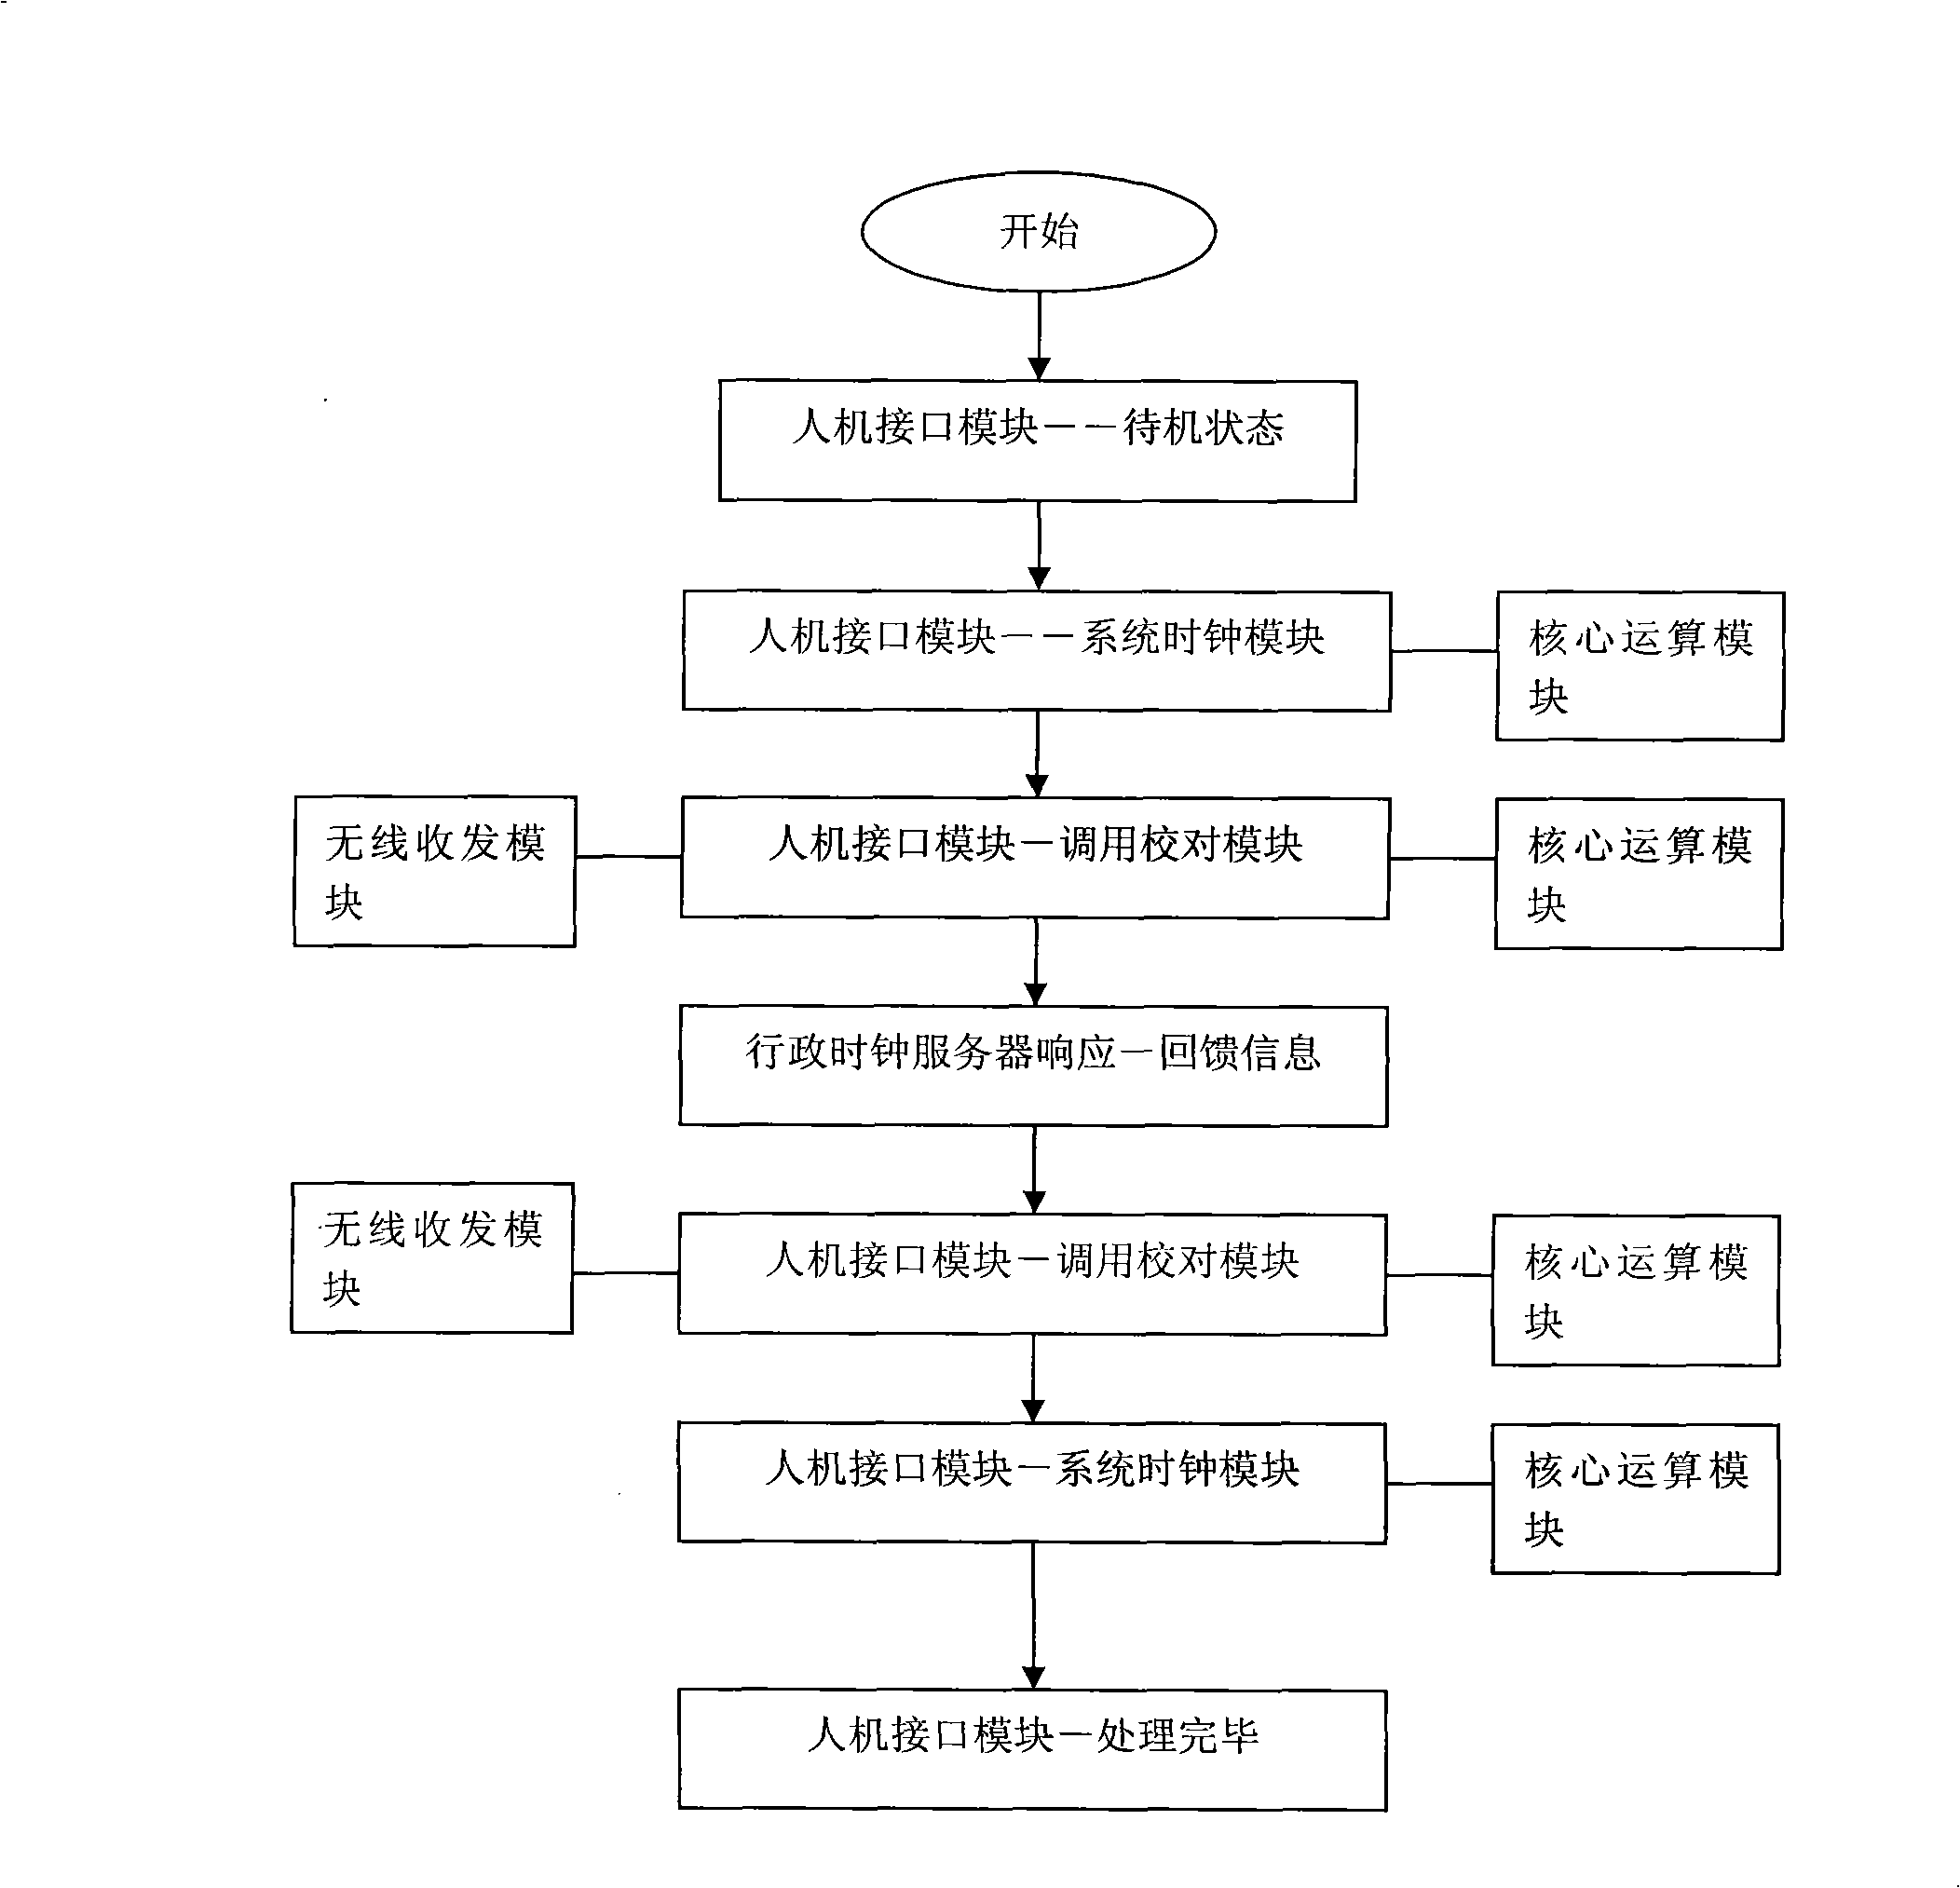 System and method for automatically checking mobile phone time